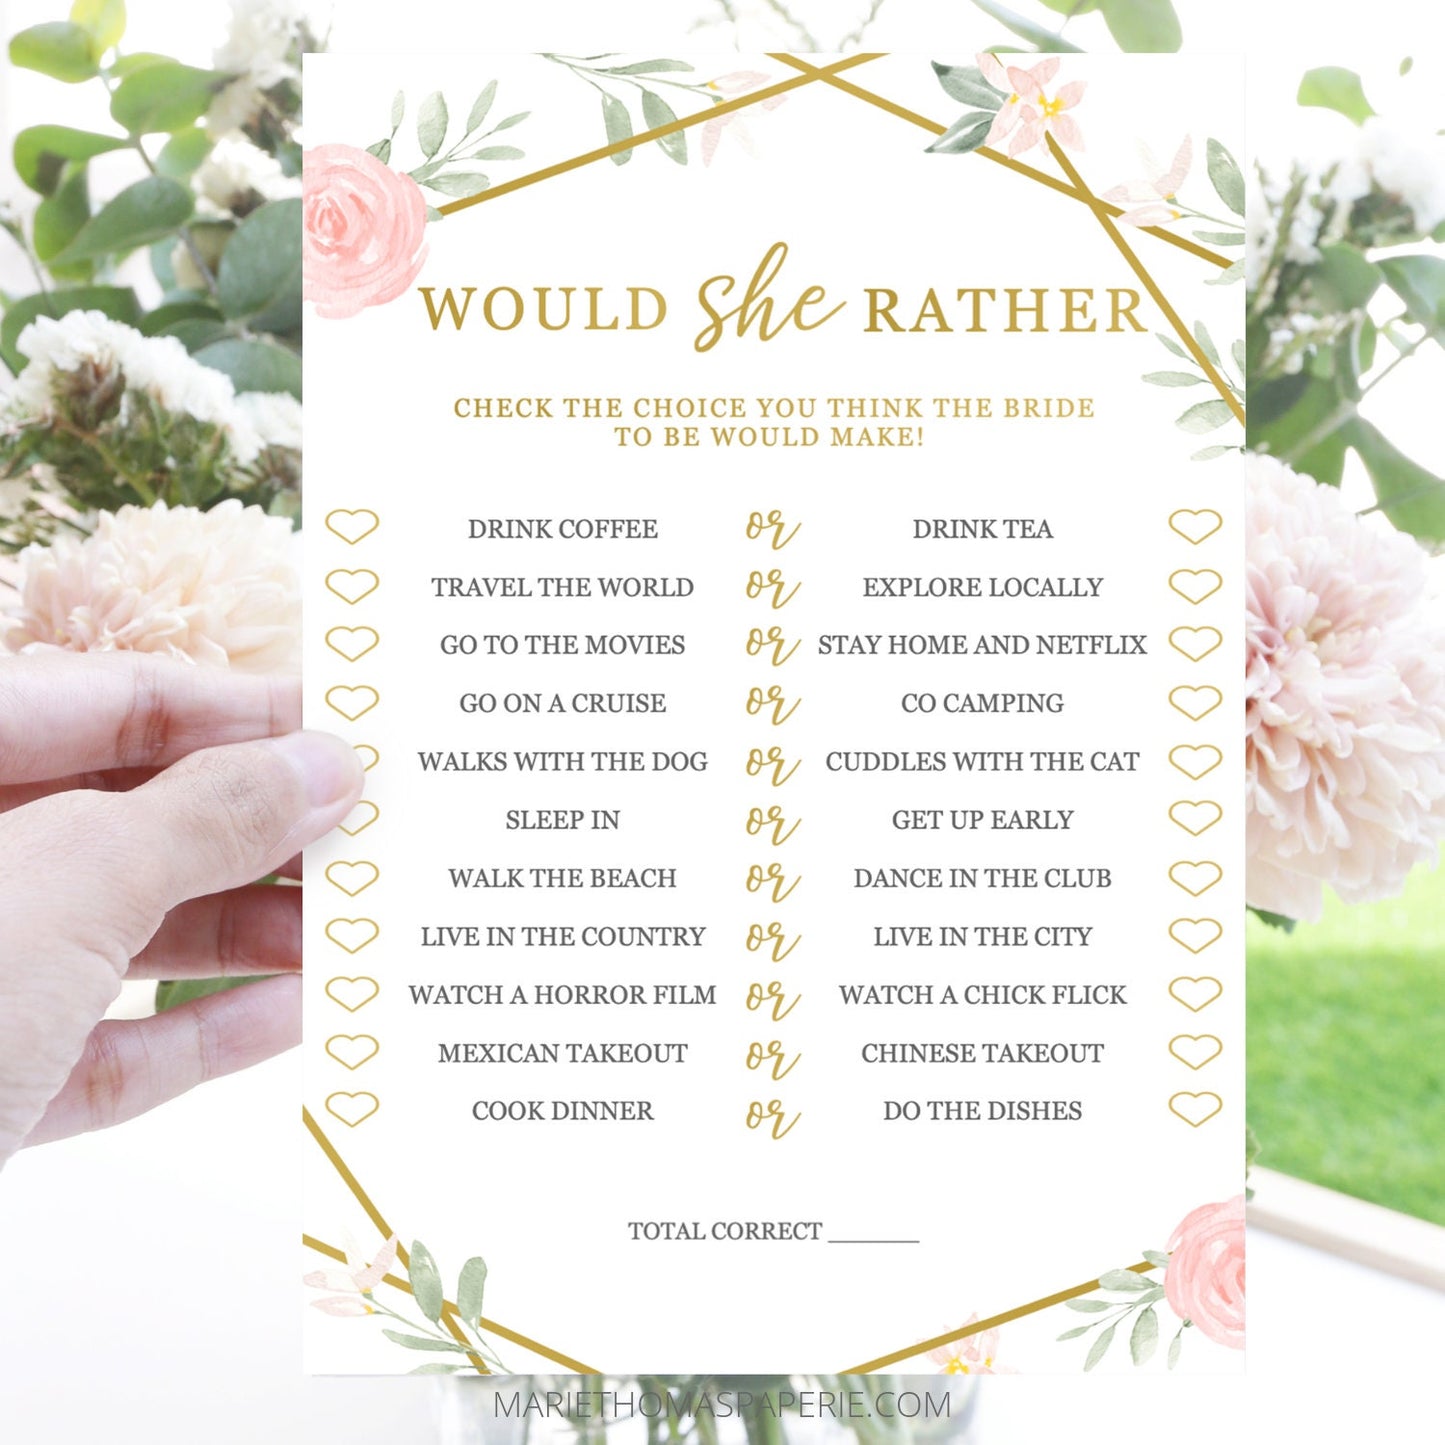 Editable Would She Rather Bridal Shower Games Wedding Games Blush and Gold Template